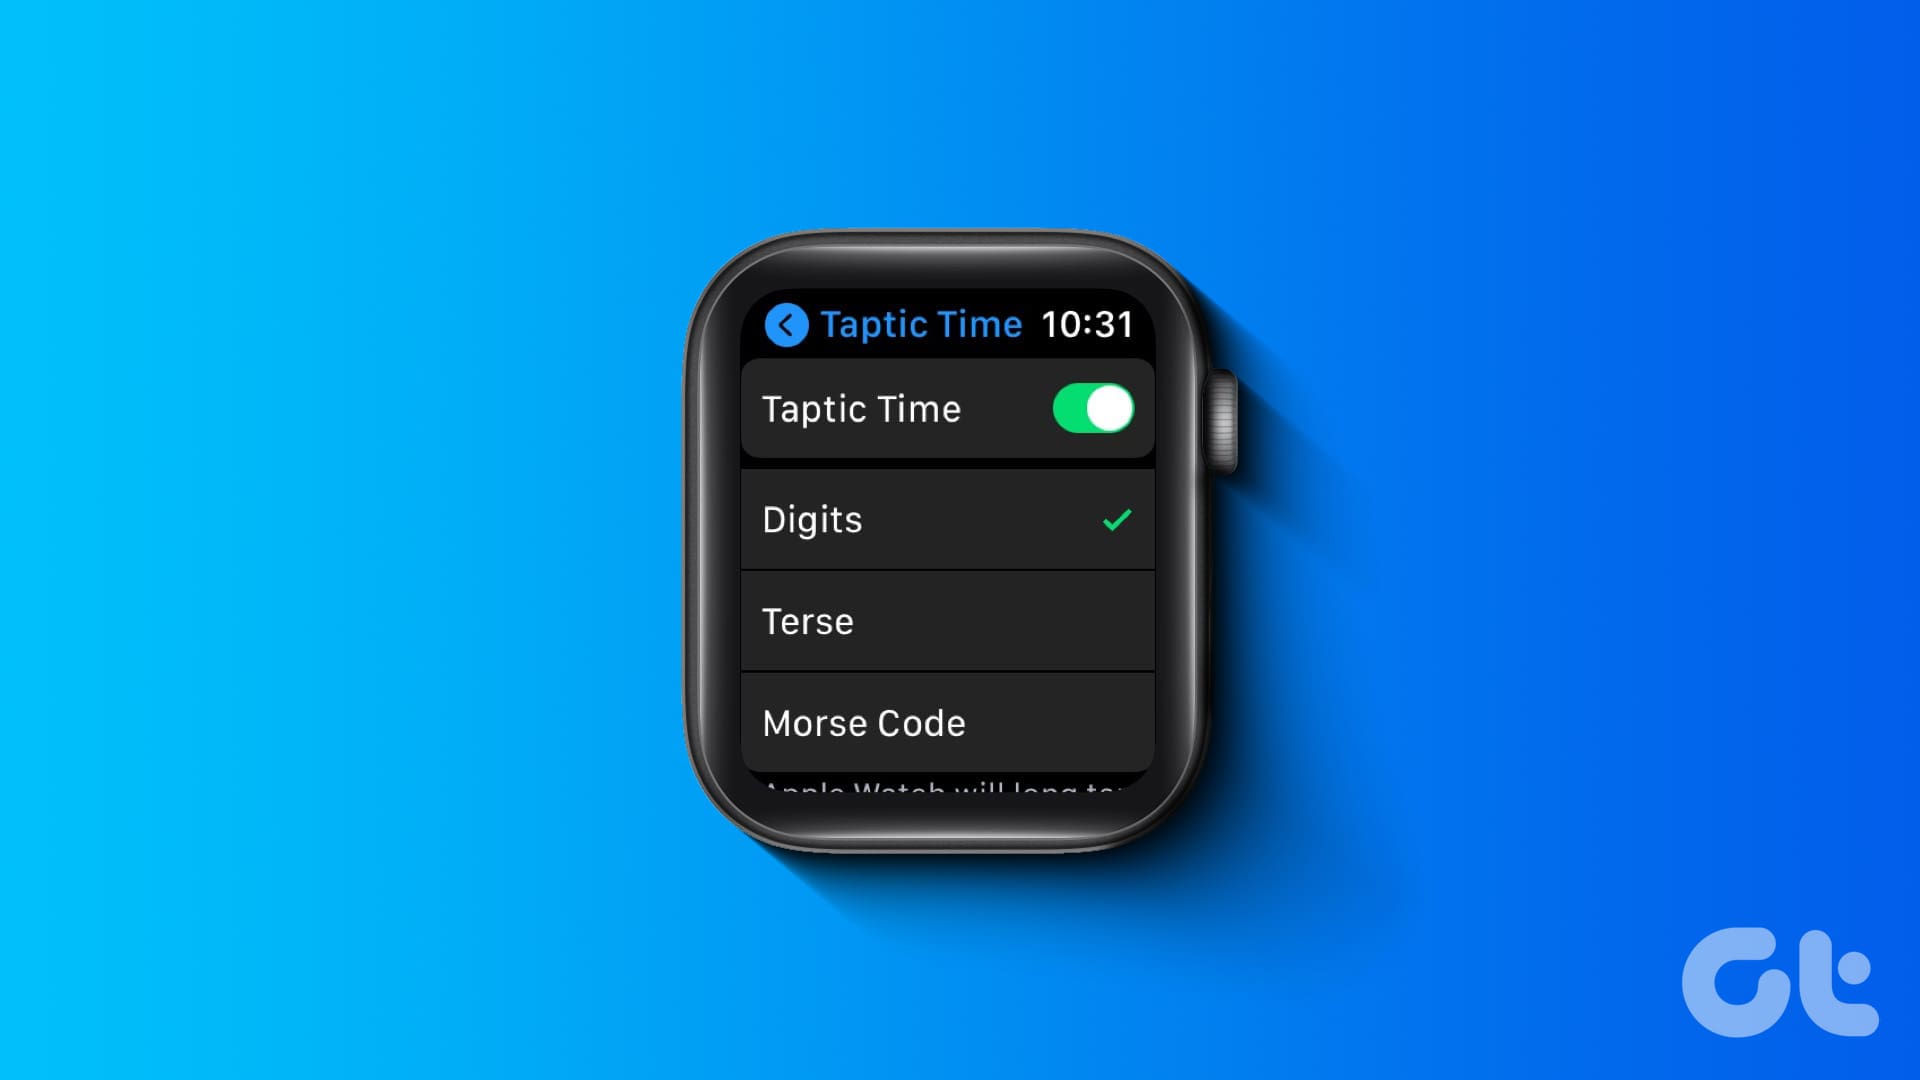 How to Use Taptic Time on Apple Watch